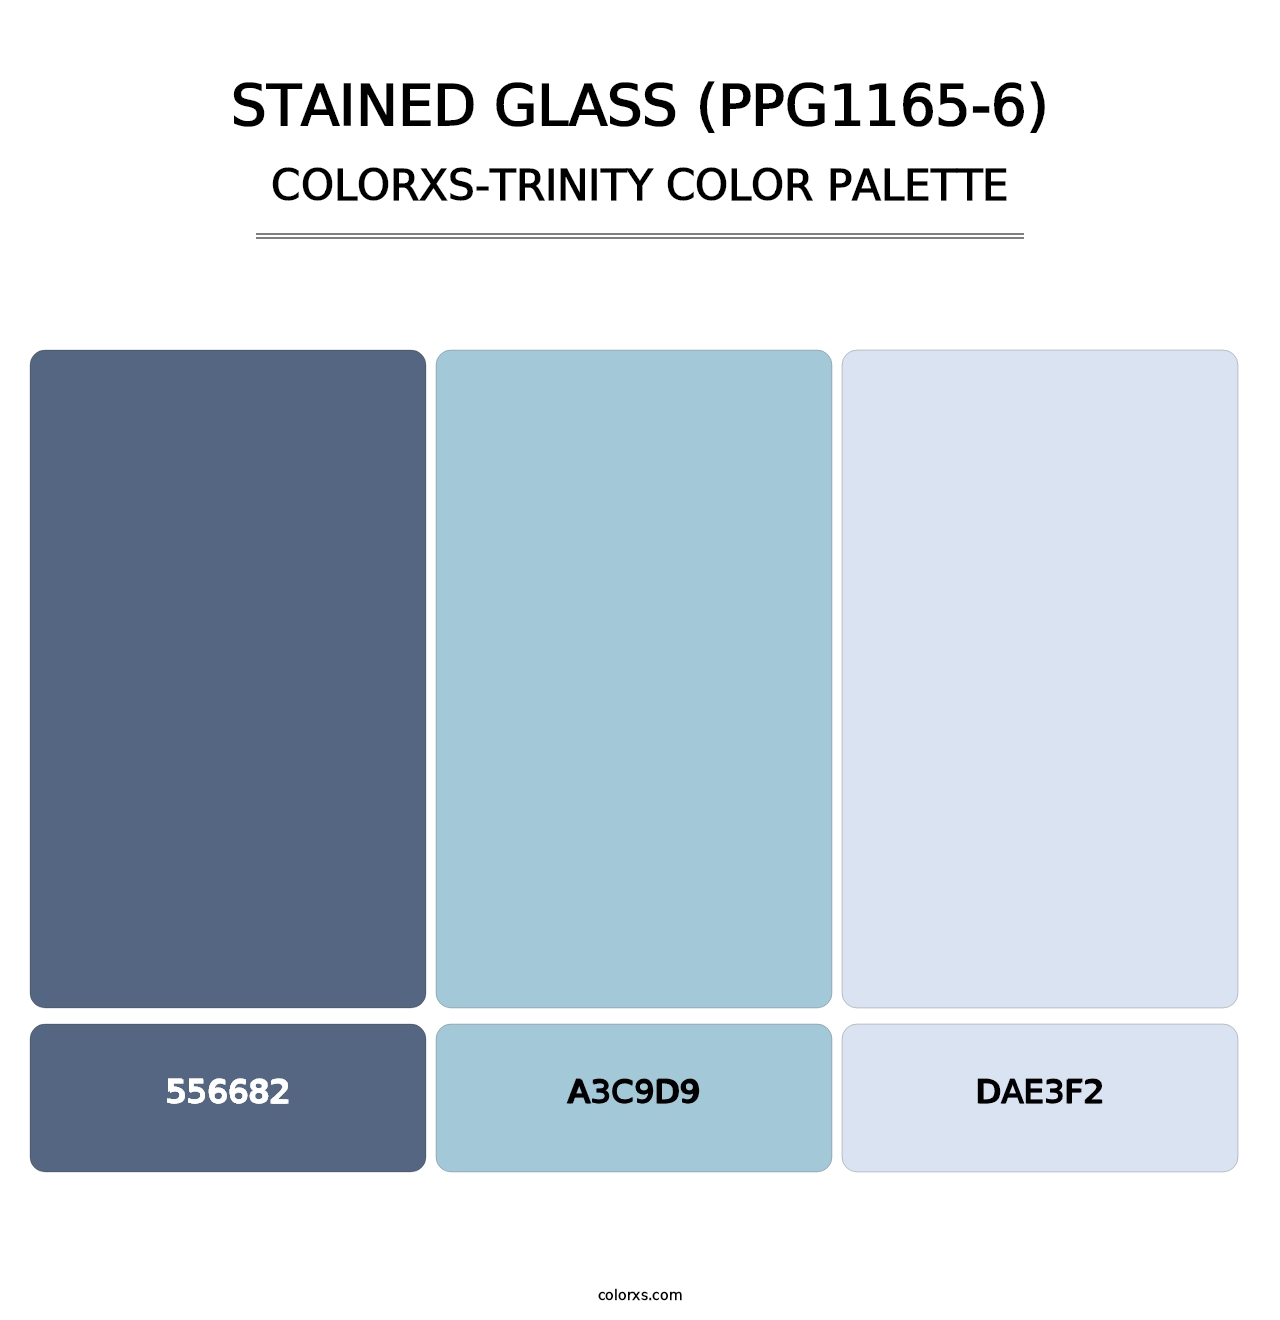 Stained Glass (PPG1165-6) - Colorxs Trinity Palette